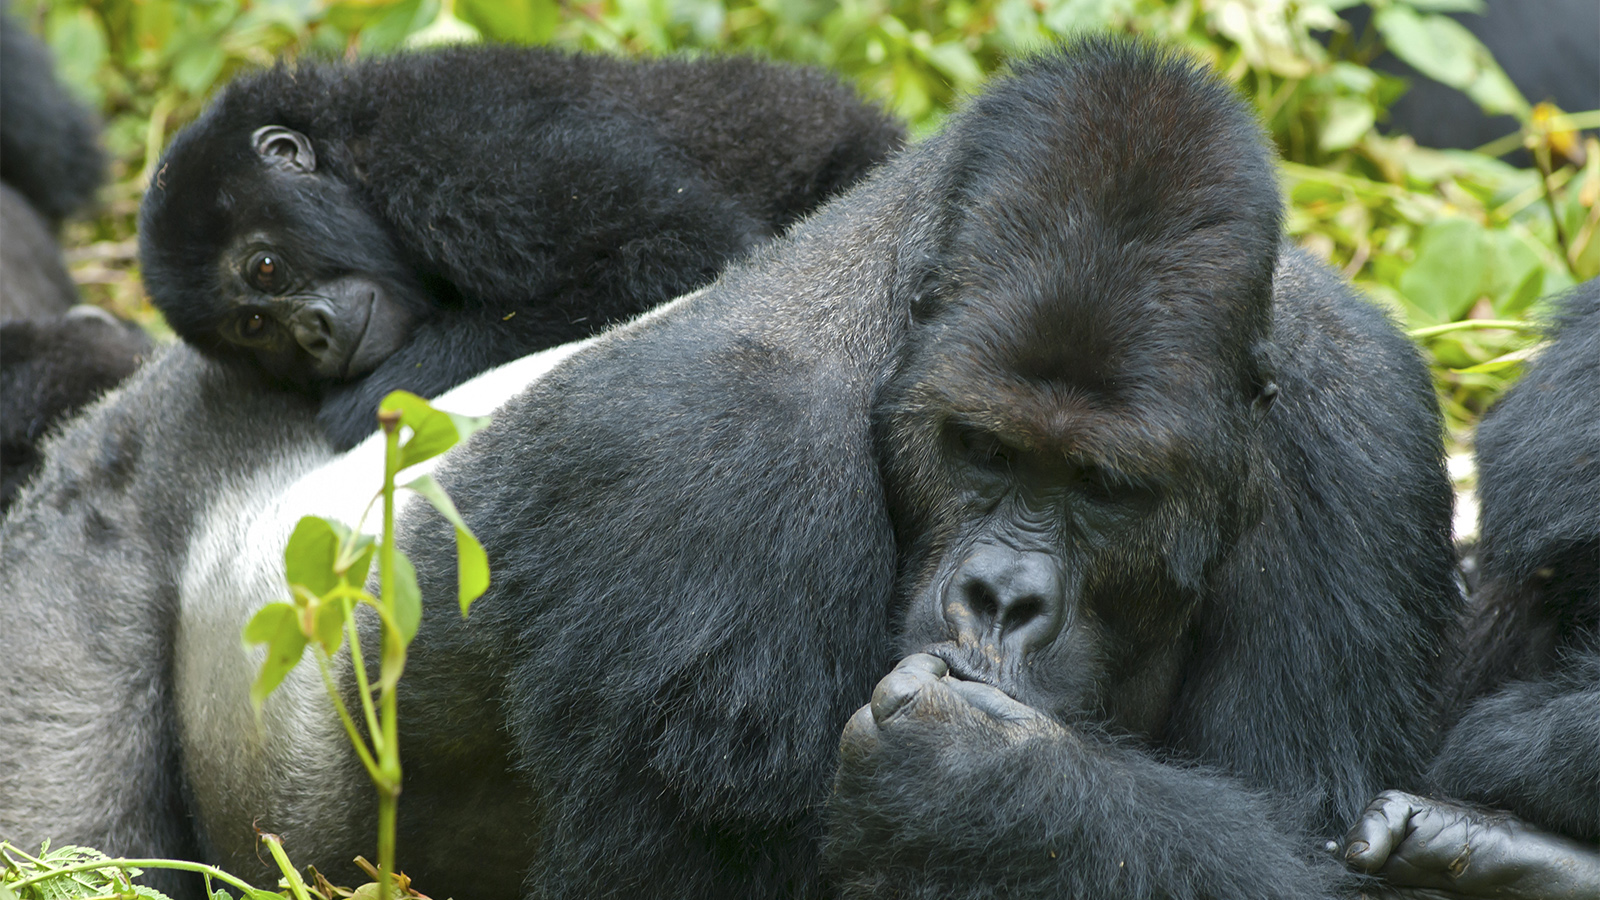 Can I use my permit to trek gorillas twice in one day?